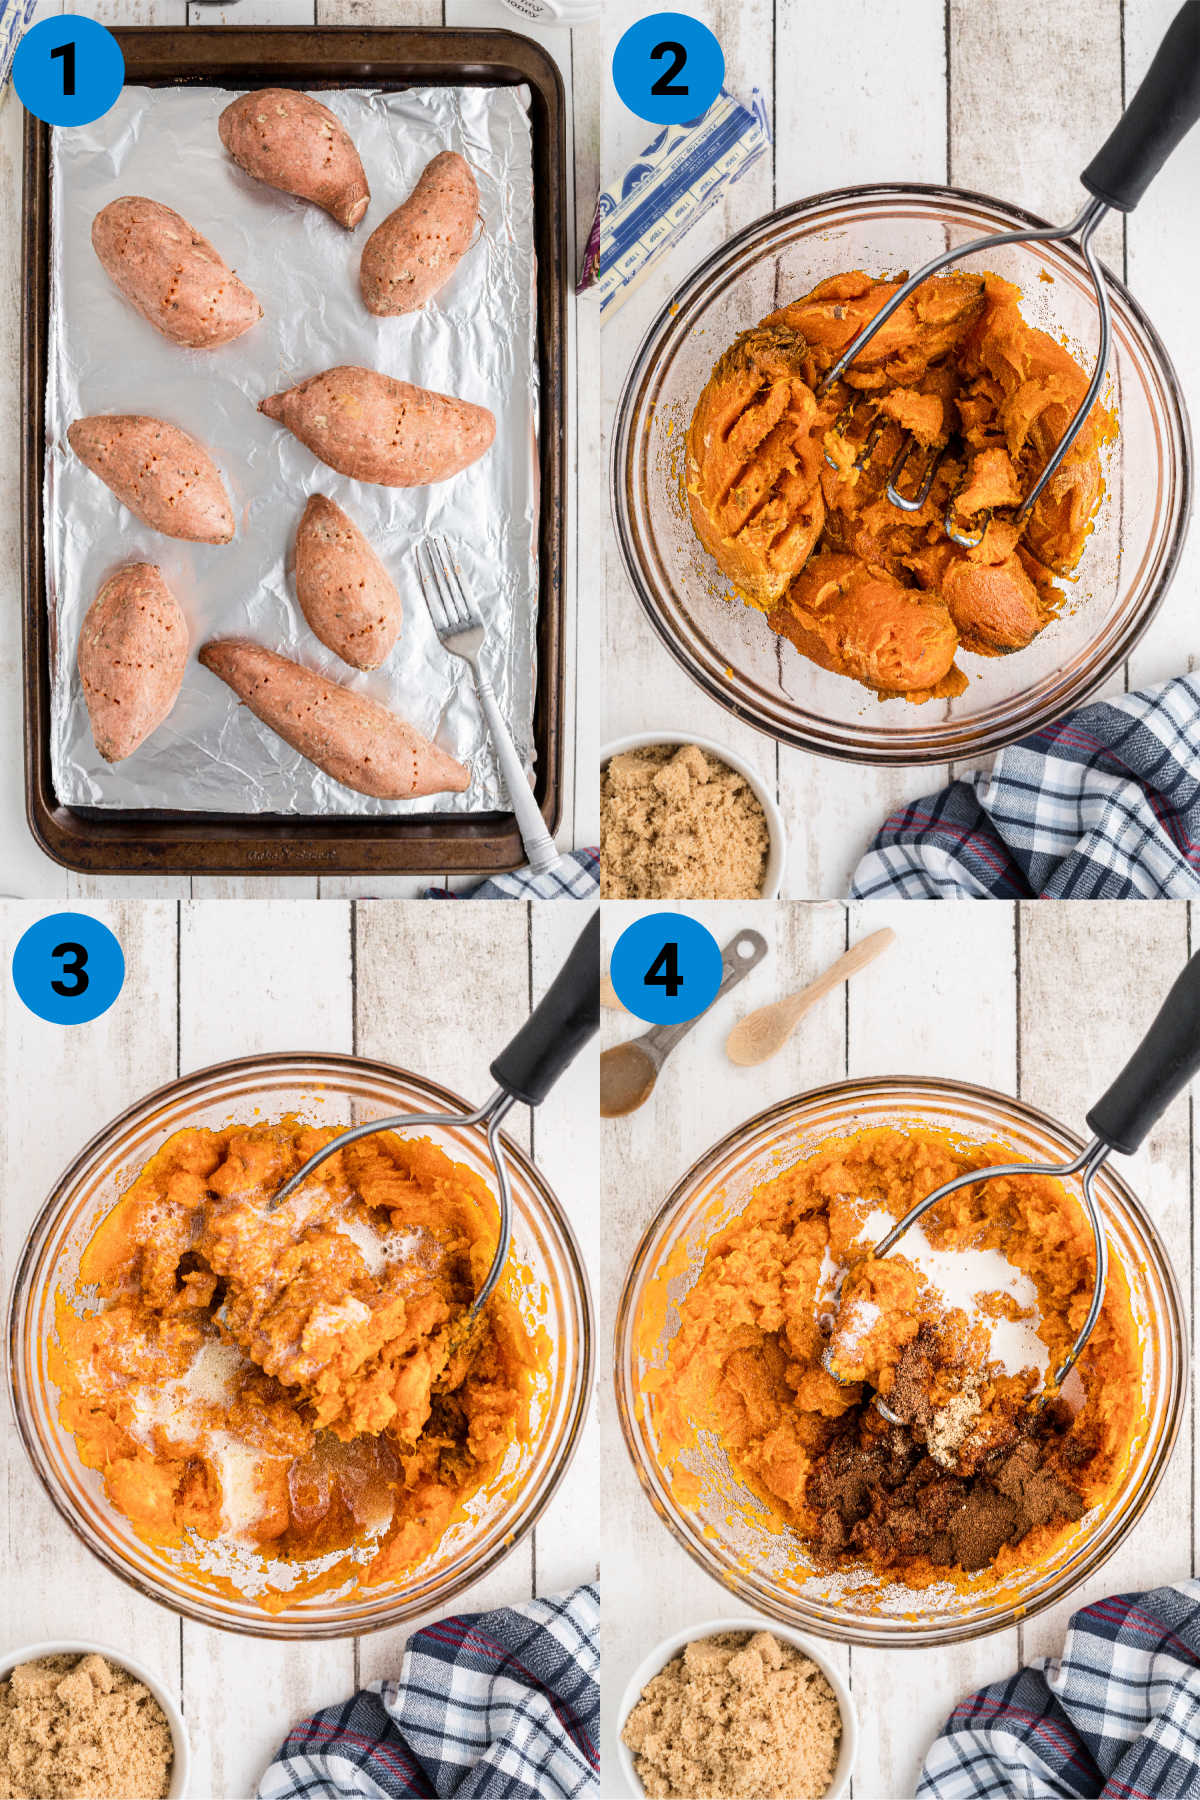 Collage of four images showing how to make sweet potato fluff, recipe steps 1-4.